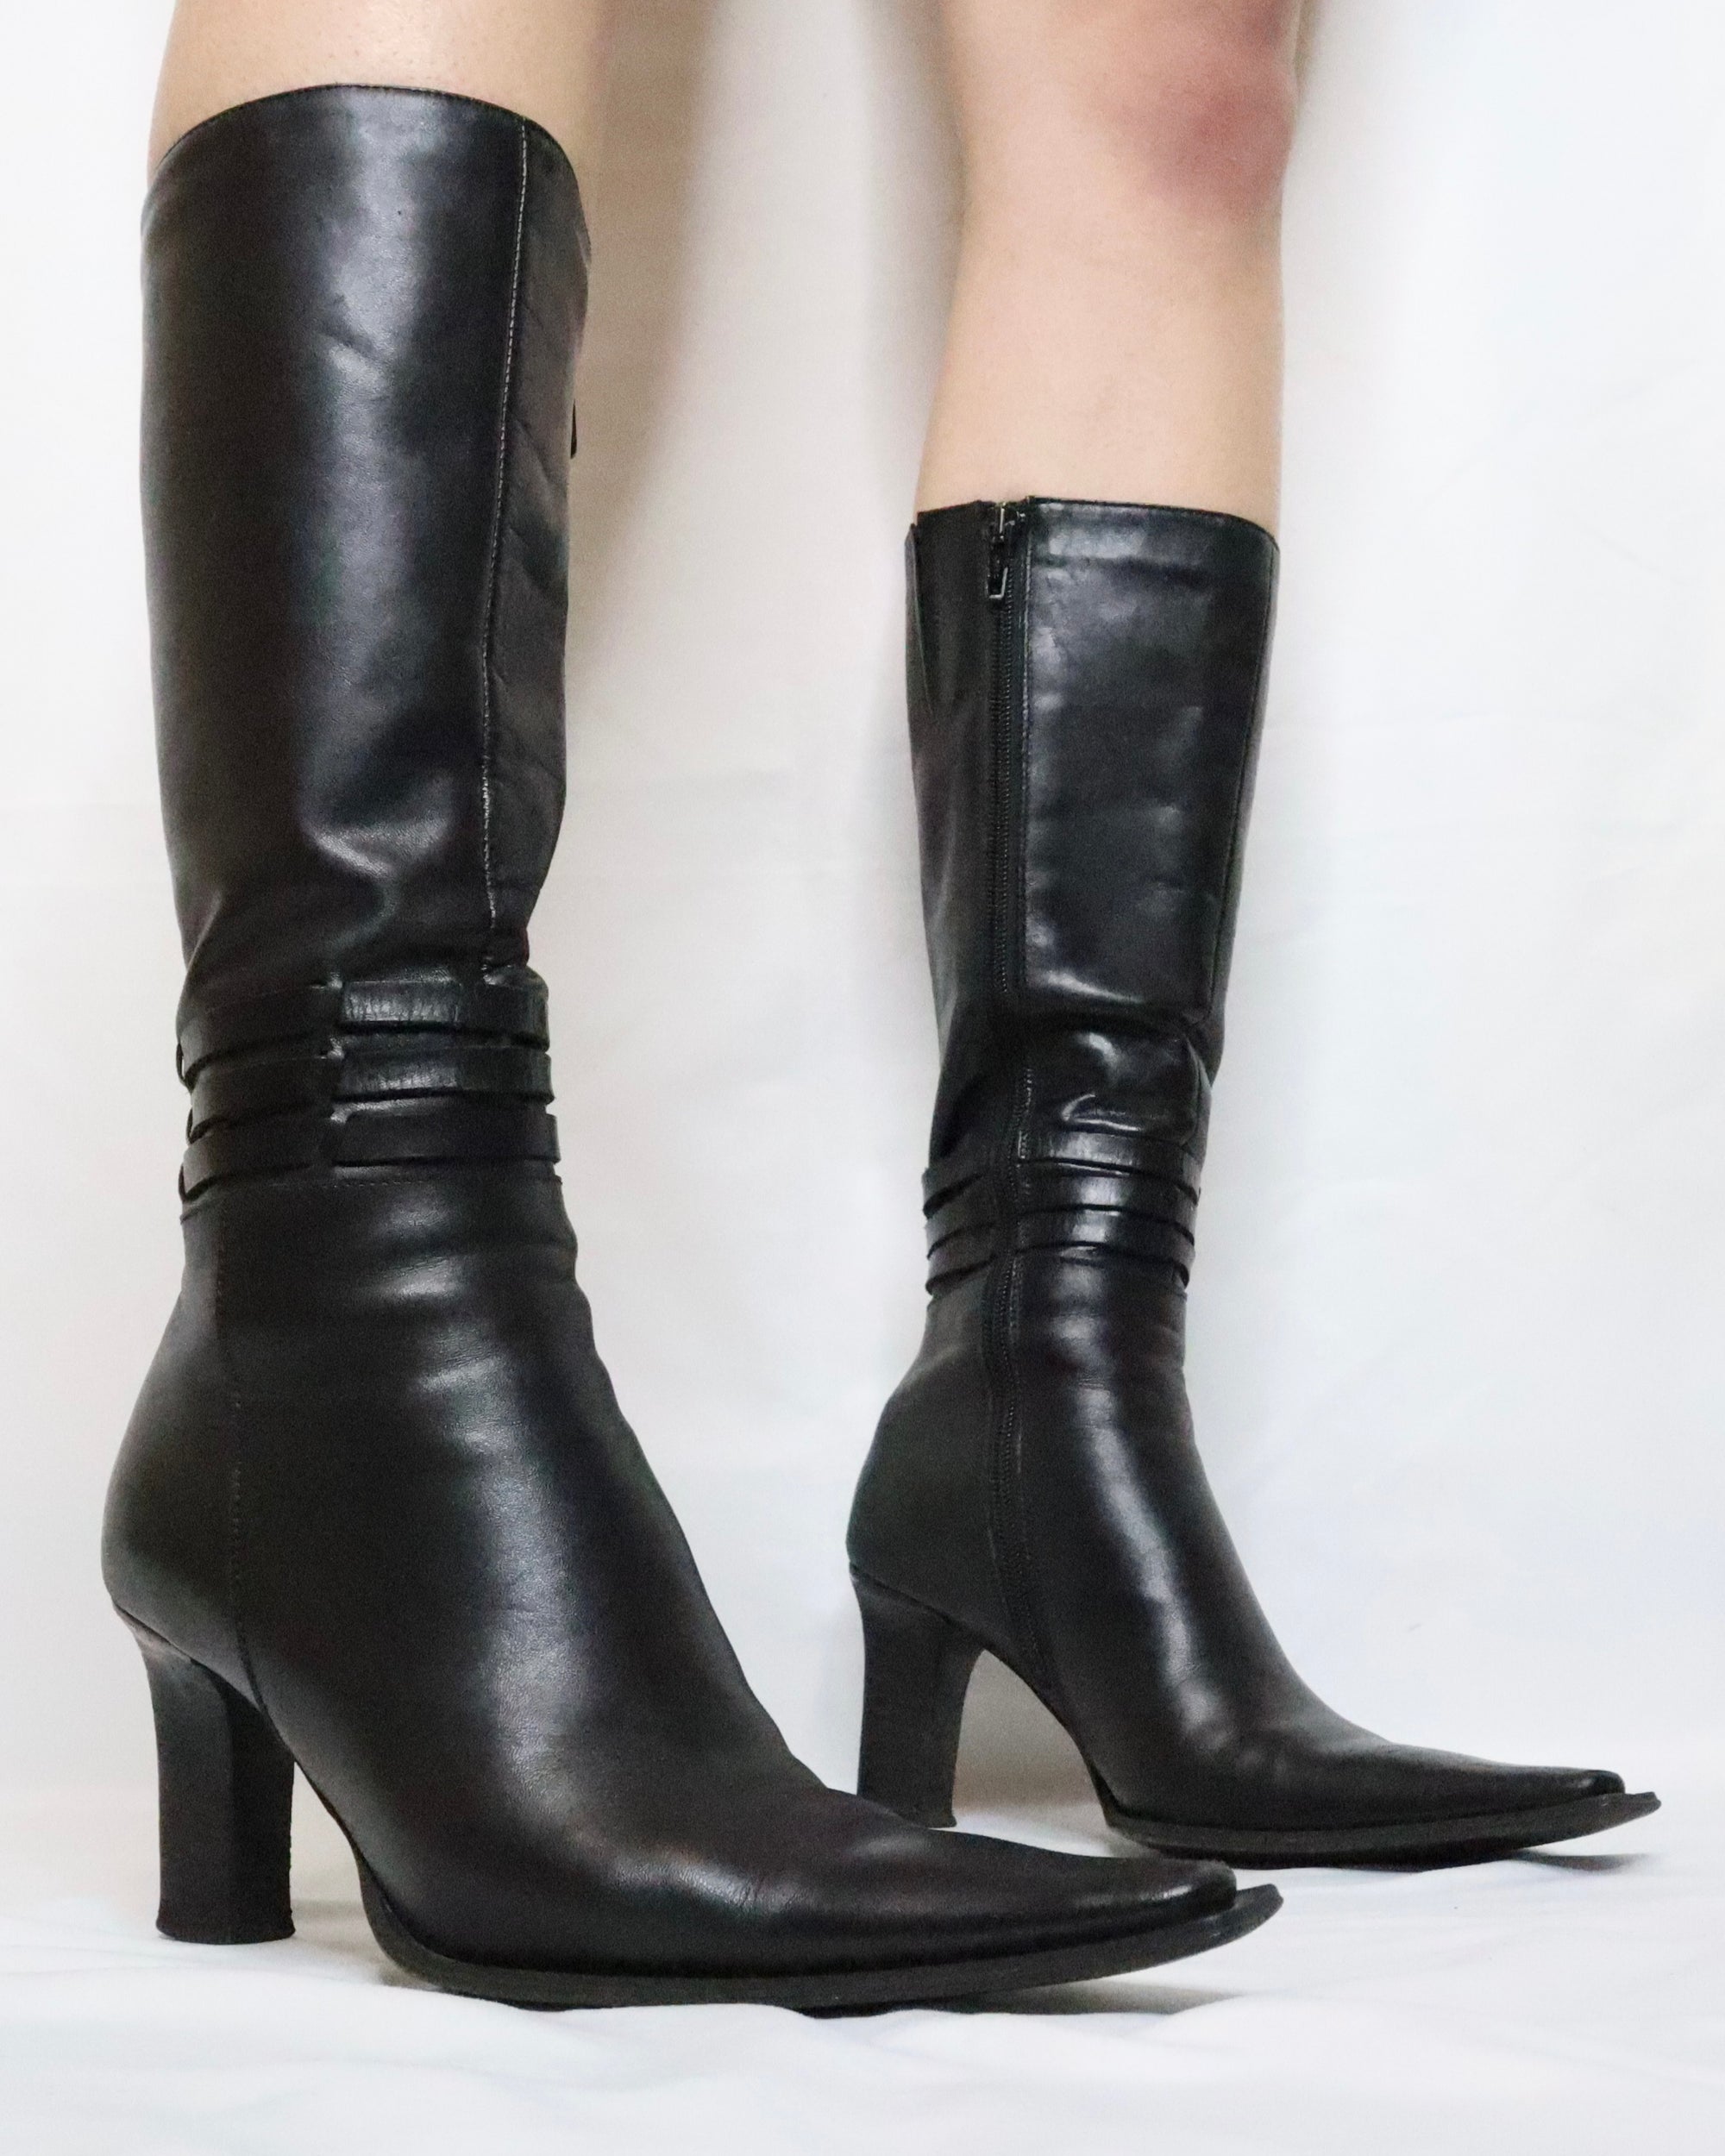 Black Leather Pointed Toe Boots (6 US/36 EU) 